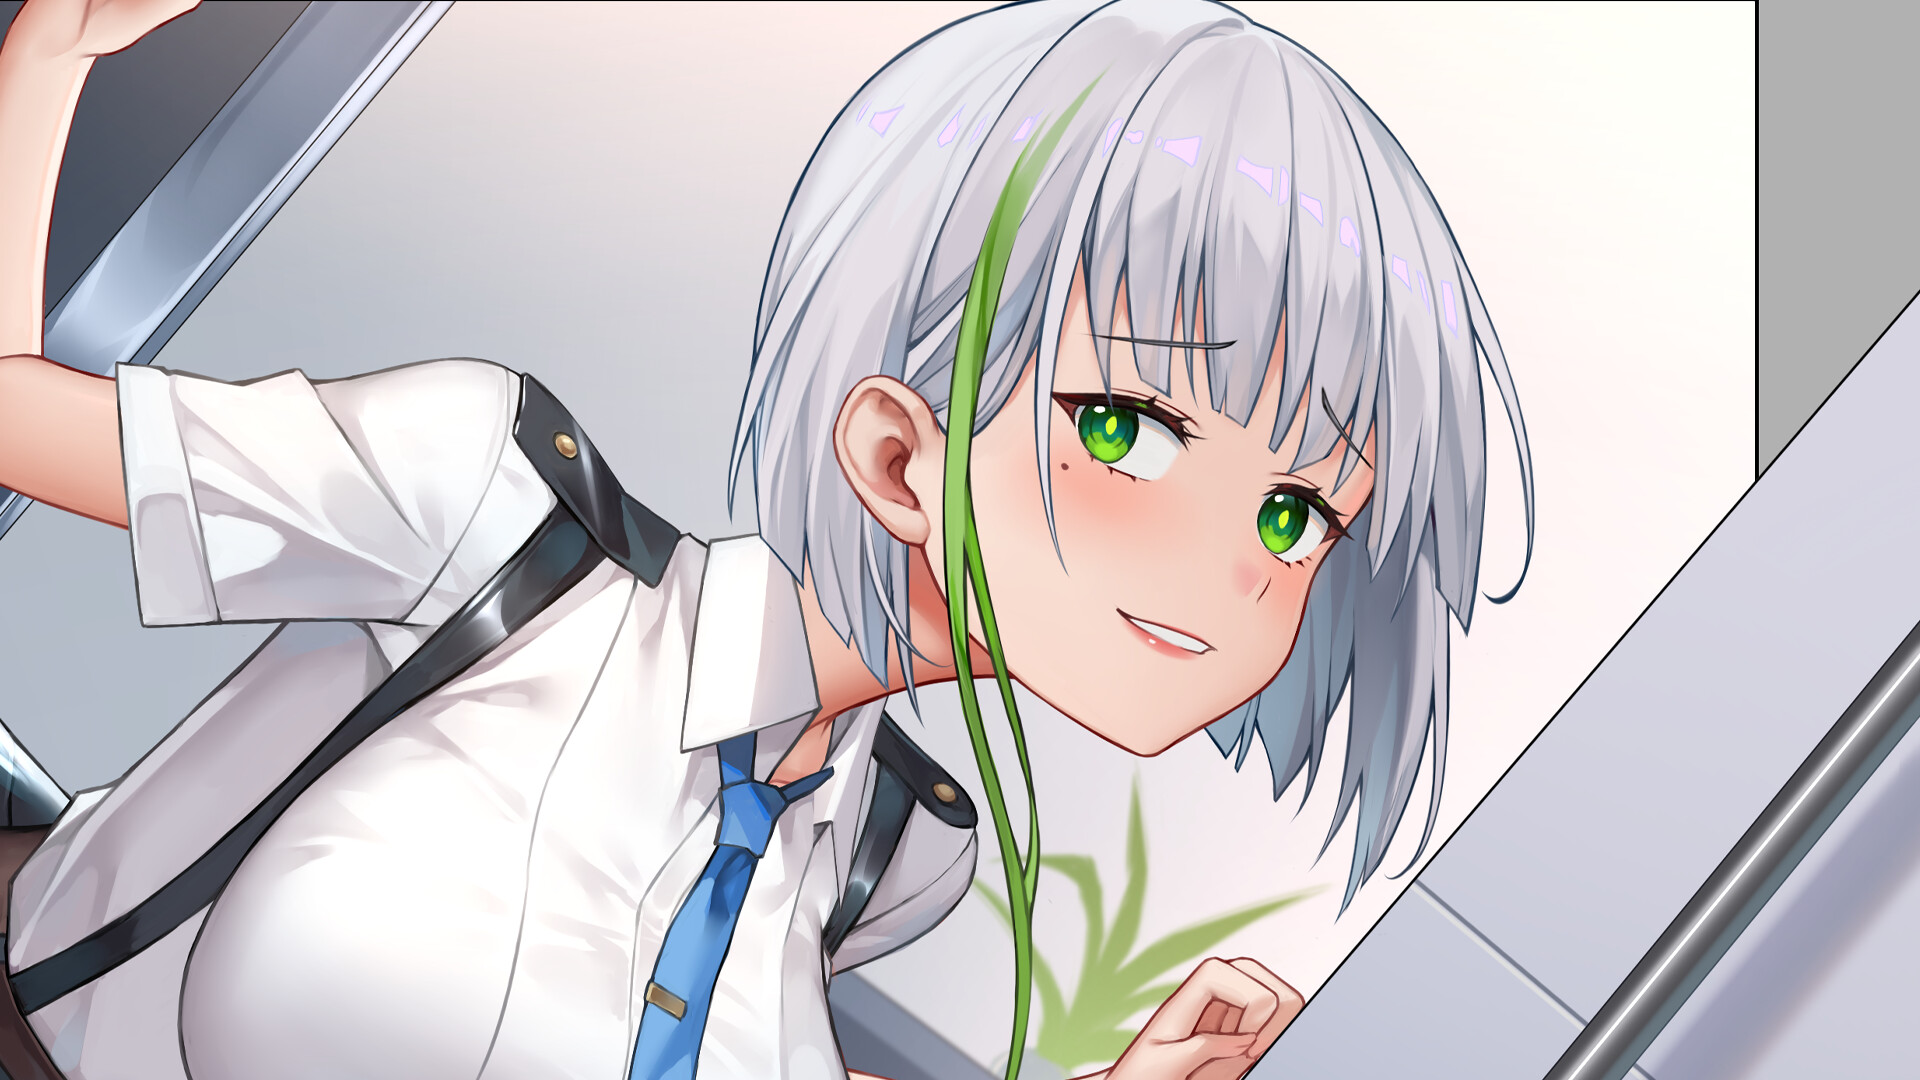 Hot And Lovely: Uniform [Final] [Lovely Games]